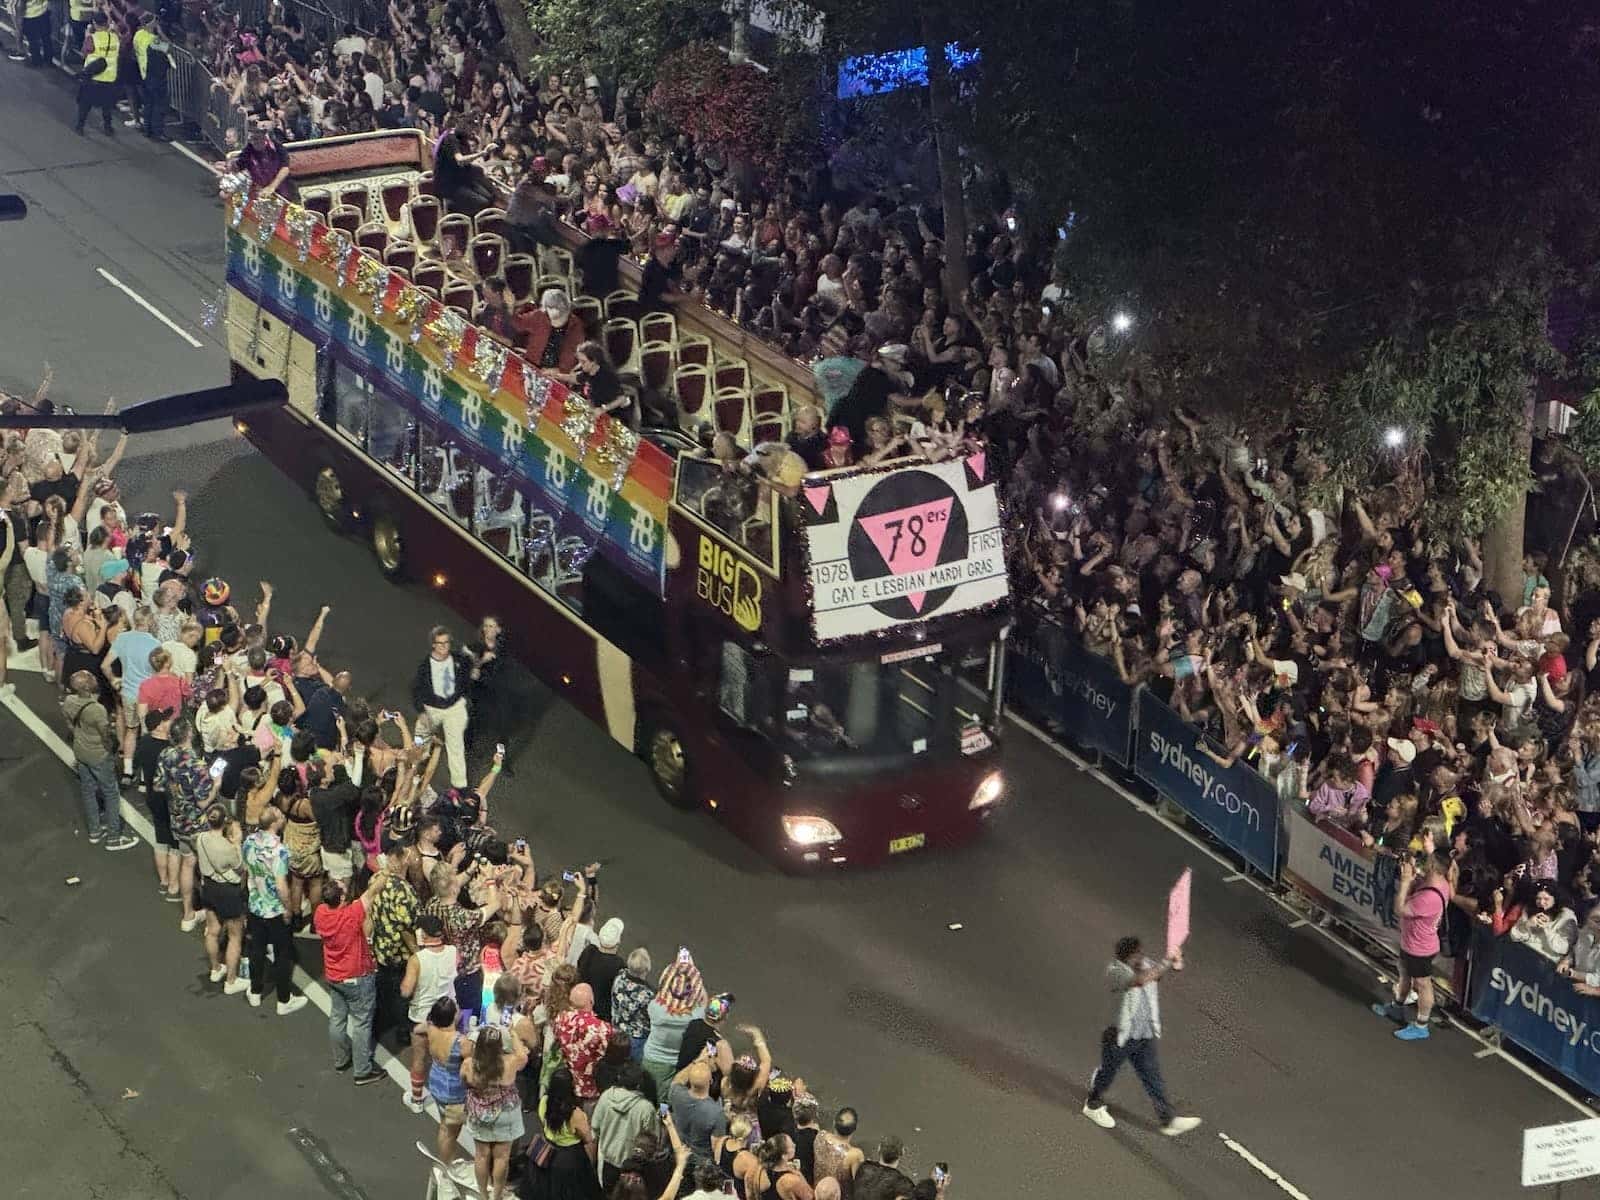 The 78ers marching in the Sydney Mardi Gras Parade.